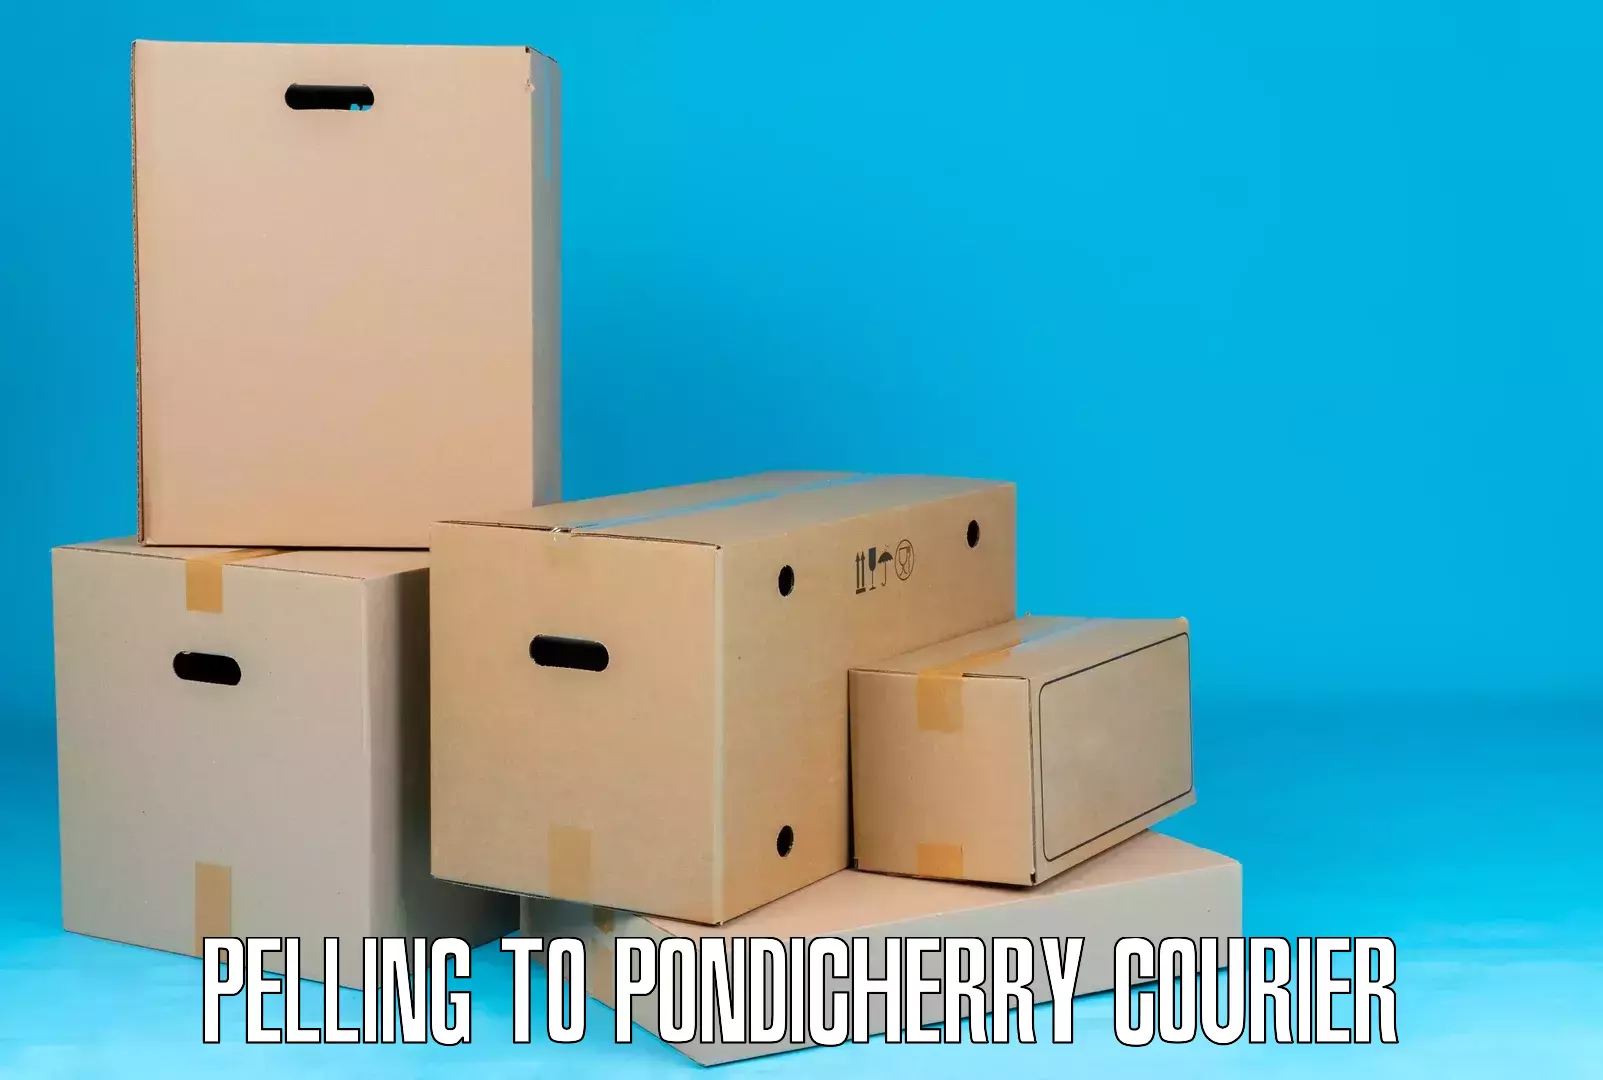 Cargo courier service Pelling to Pondicherry